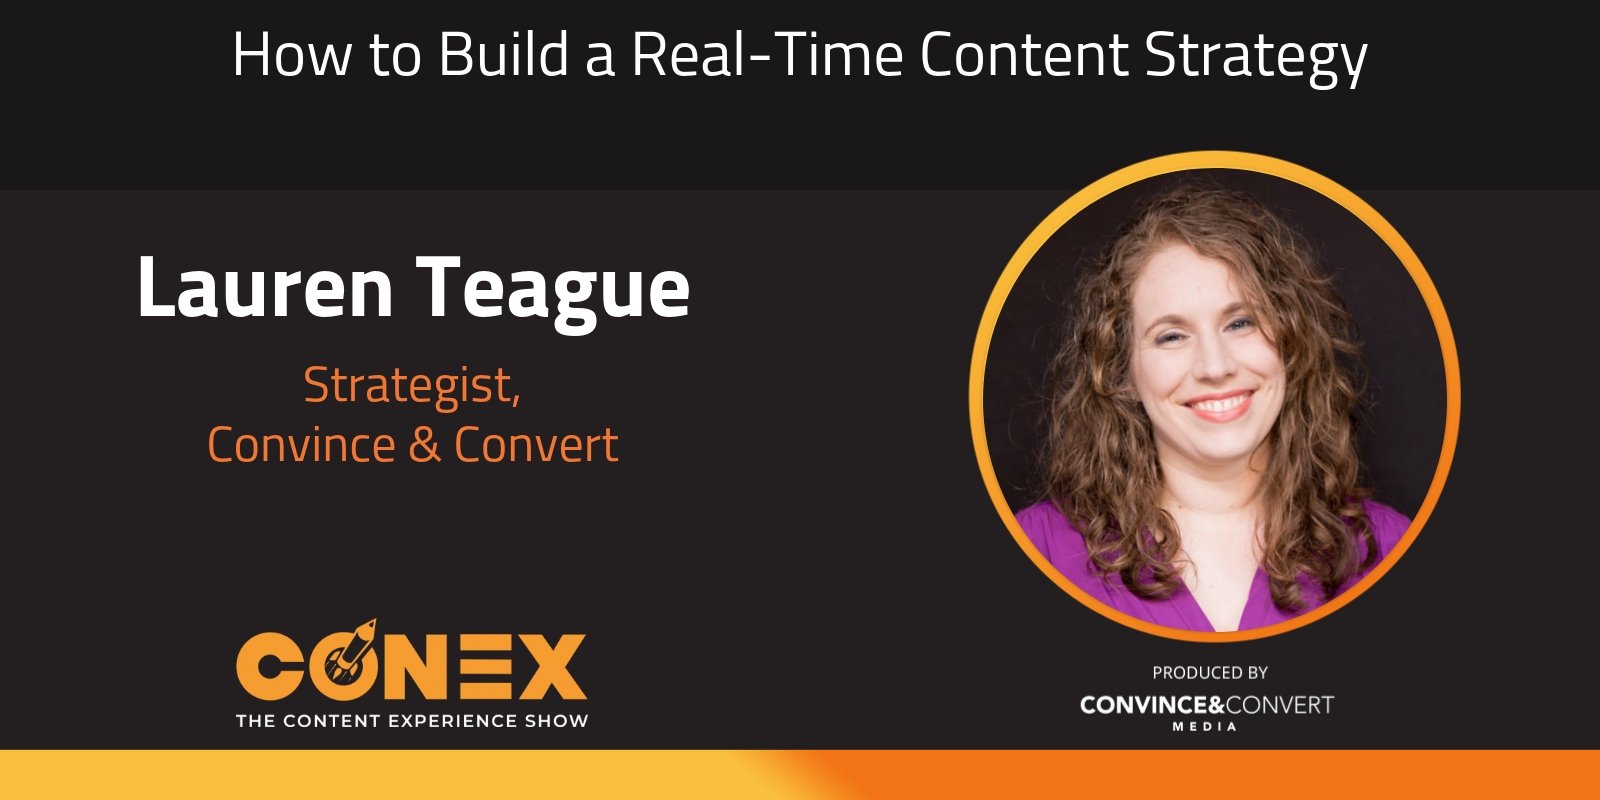 How to Build a Real-Time Content Strategy